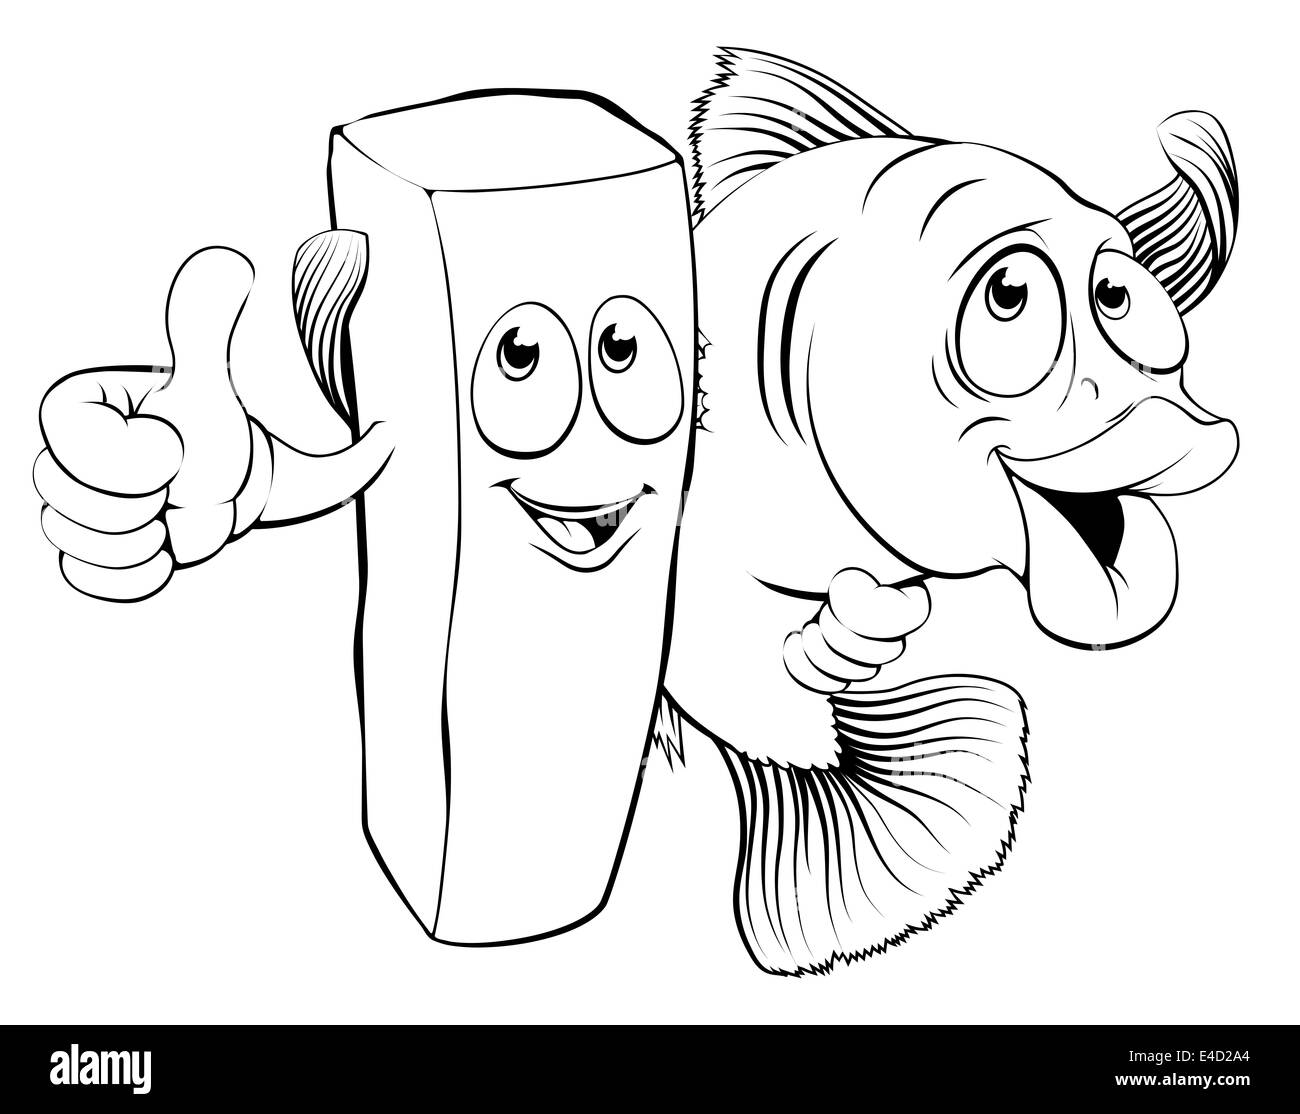 Une illustration de fish and chips mascot caractères arm in arm giving Thumbs up Banque D'Images